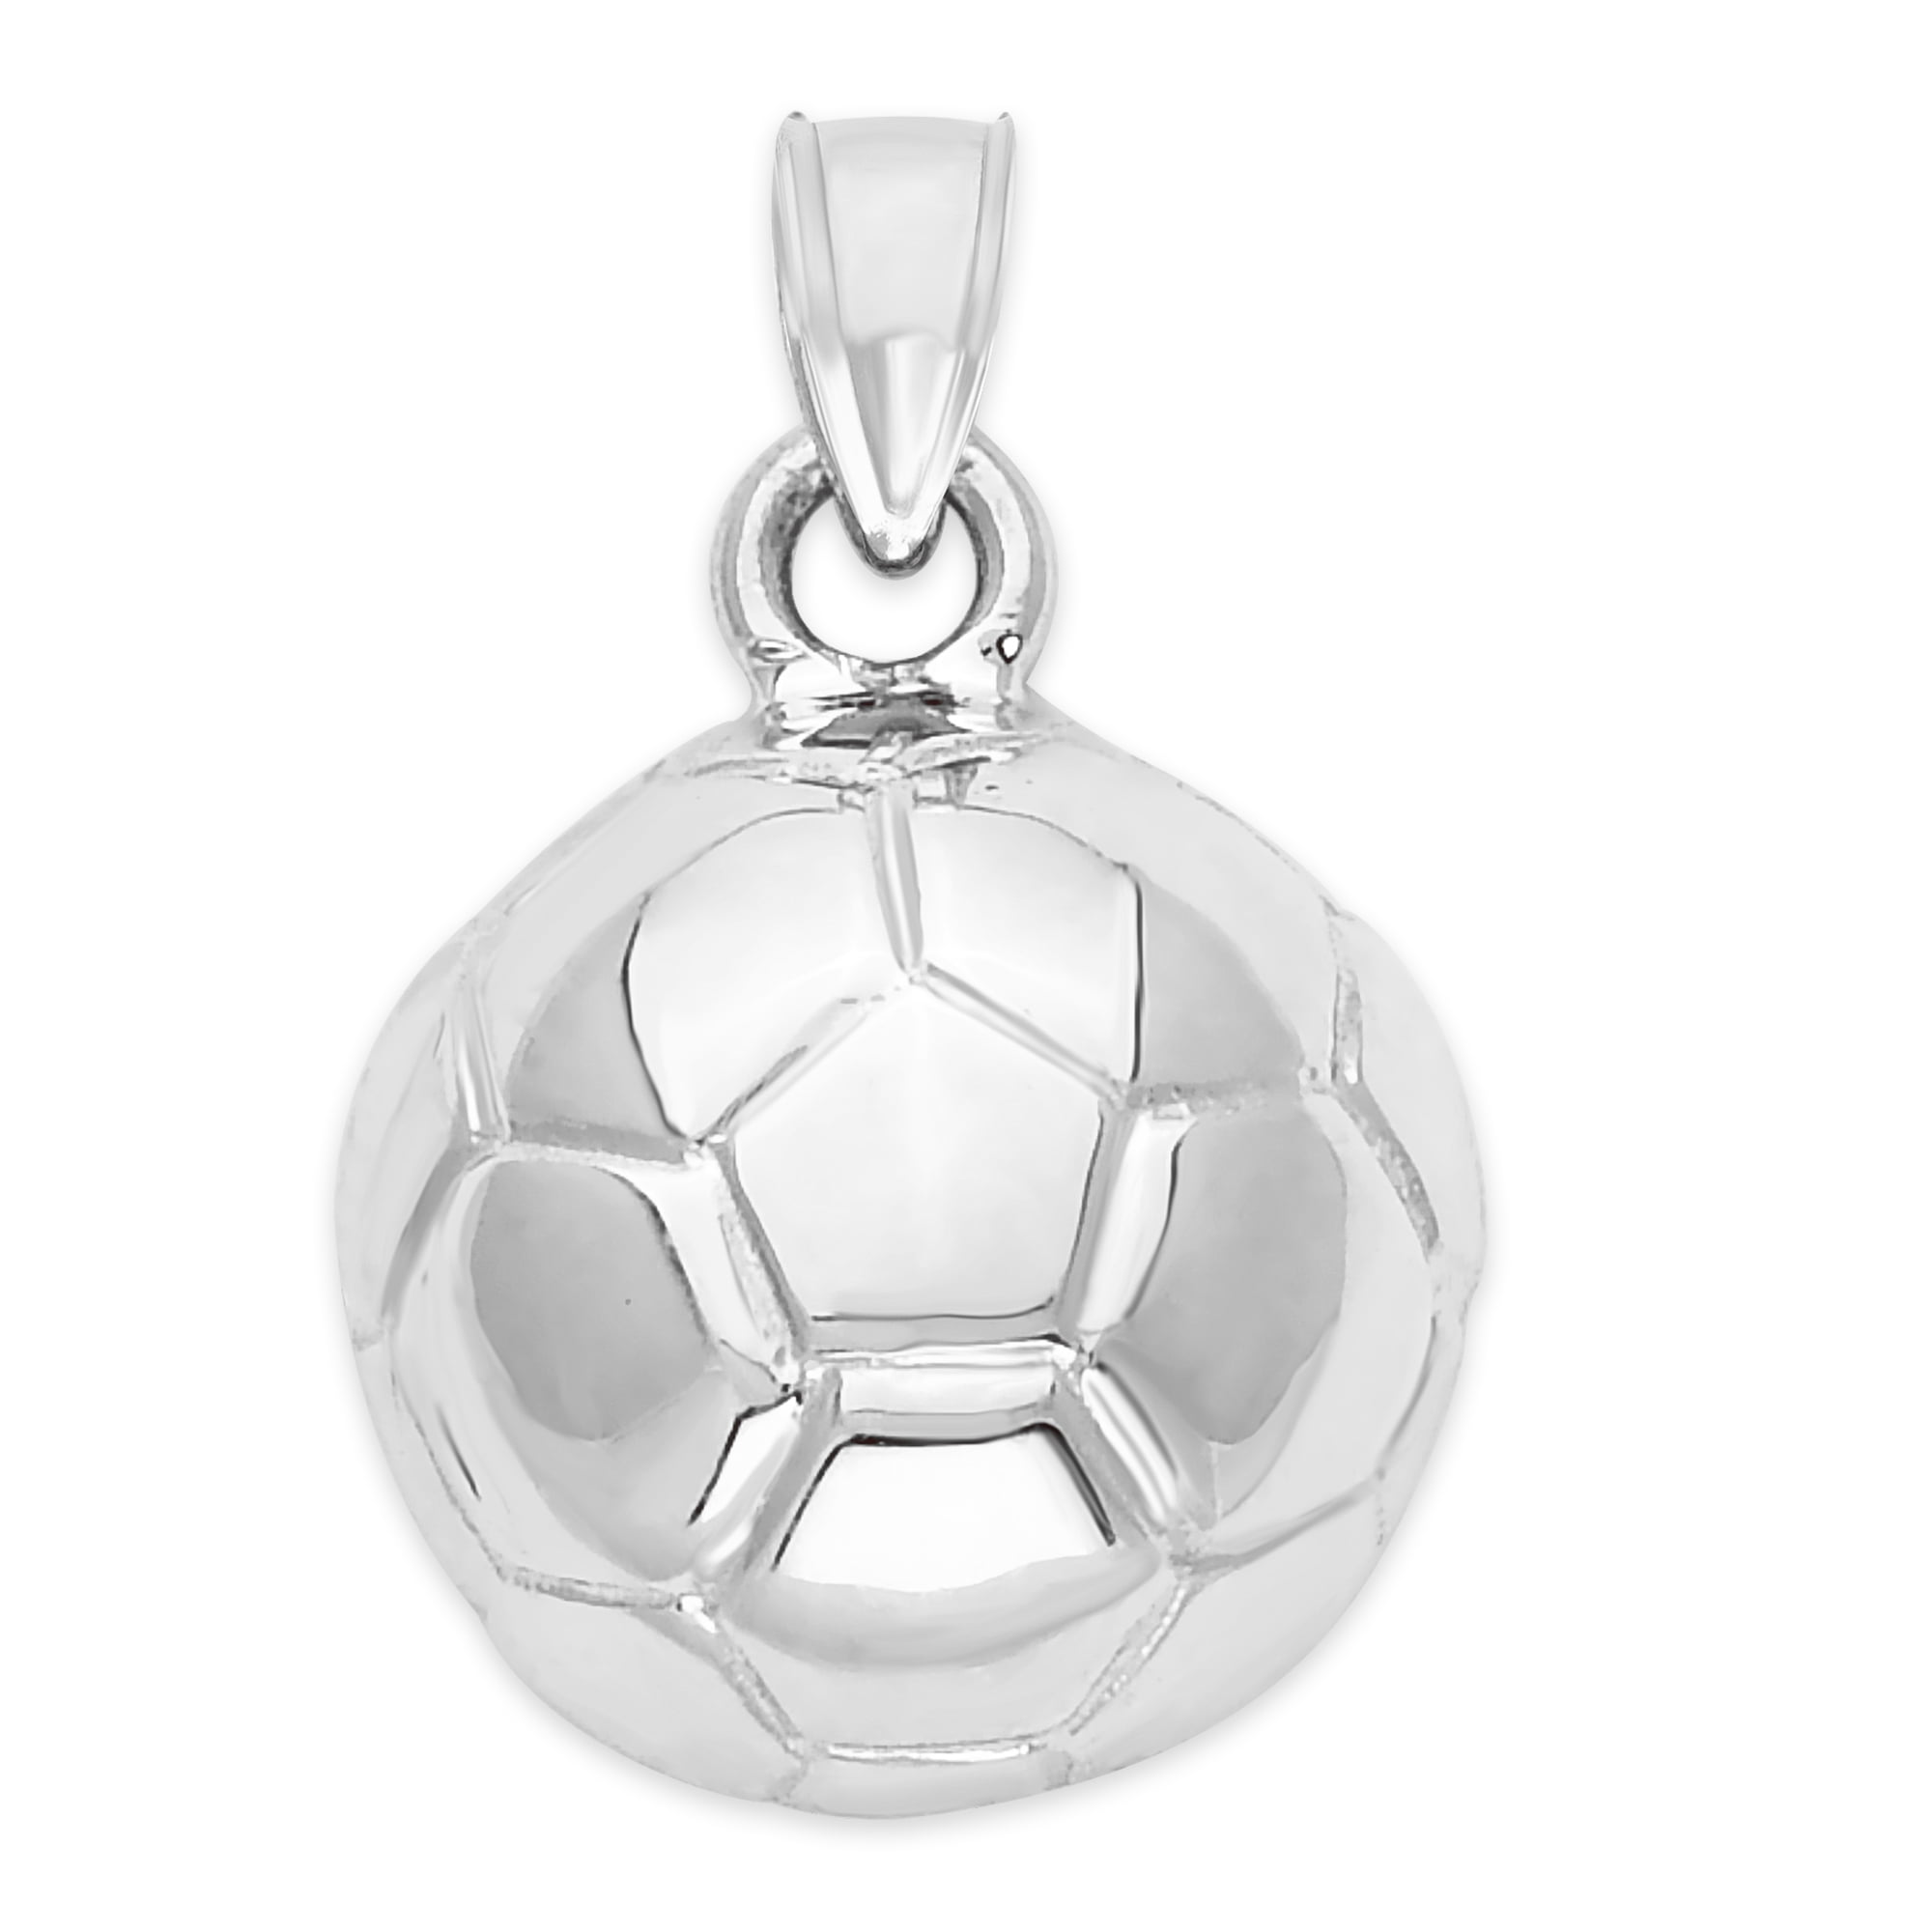 Finejewelers Sterling Silver Antiqued Soccer Ball Pendant Necklace Chain Included 